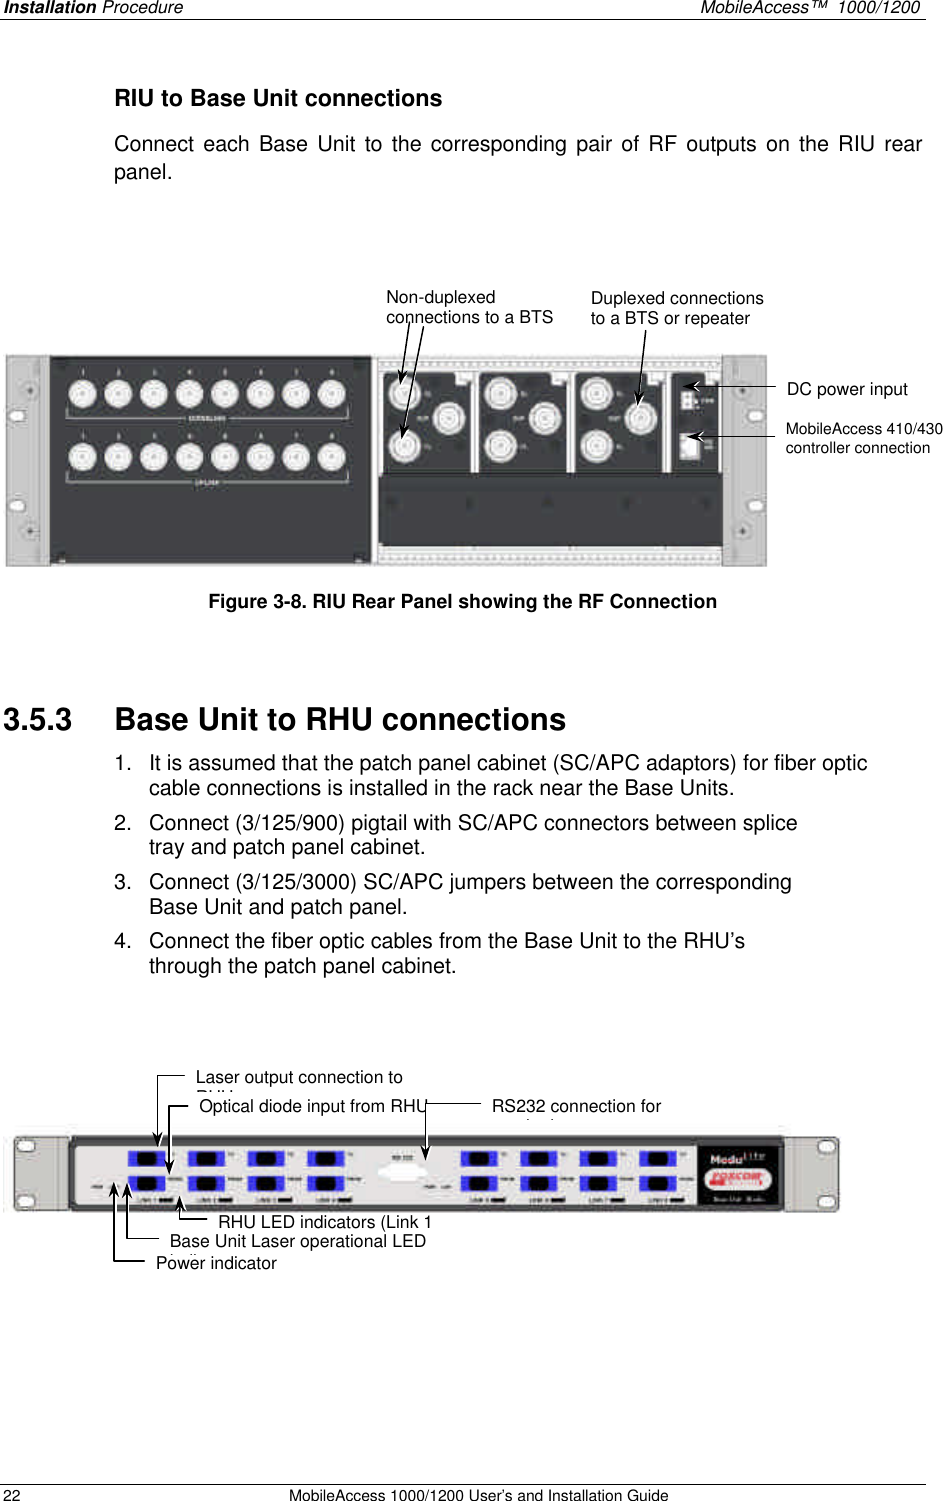 Installation Procedure    MobileAccess™  1000/1200 22 MobileAccess 1000/1200 User’s and Installation Guide  RIU to Base Unit connections Connect each Base Unit to the corresponding pair of RF outputs on the RIU rear panel.      Figure 3-8. RIU Rear Panel showing the RF Connection  3.5.3  Base Unit to RHU connections 1. It is assumed that the patch panel cabinet (SC/APC adaptors) for fiber optic cable connections is installed in the rack near the Base Units.  2. Connect (3/125/900) pigtail with SC/APC connectors between splice tray and patch panel cabinet.  3. Connect (3/125/3000) SC/APC jumpers between the corresponding Base Unit and patch panel.  4. Connect the fiber optic cables from the Base Unit to the RHU’s through the patch panel cabinet.          DC power input MobileAccess 410/430 controller connection  Non-duplexed connections to a BTS Duplexed connections to a BTS or repeater Laser output connection to RHU Optical diode input from RHU Base Unit Laser operational LED indicator RHU LED indicators (Link 1 to 8) RS232 connection for monitoring Power indicator 